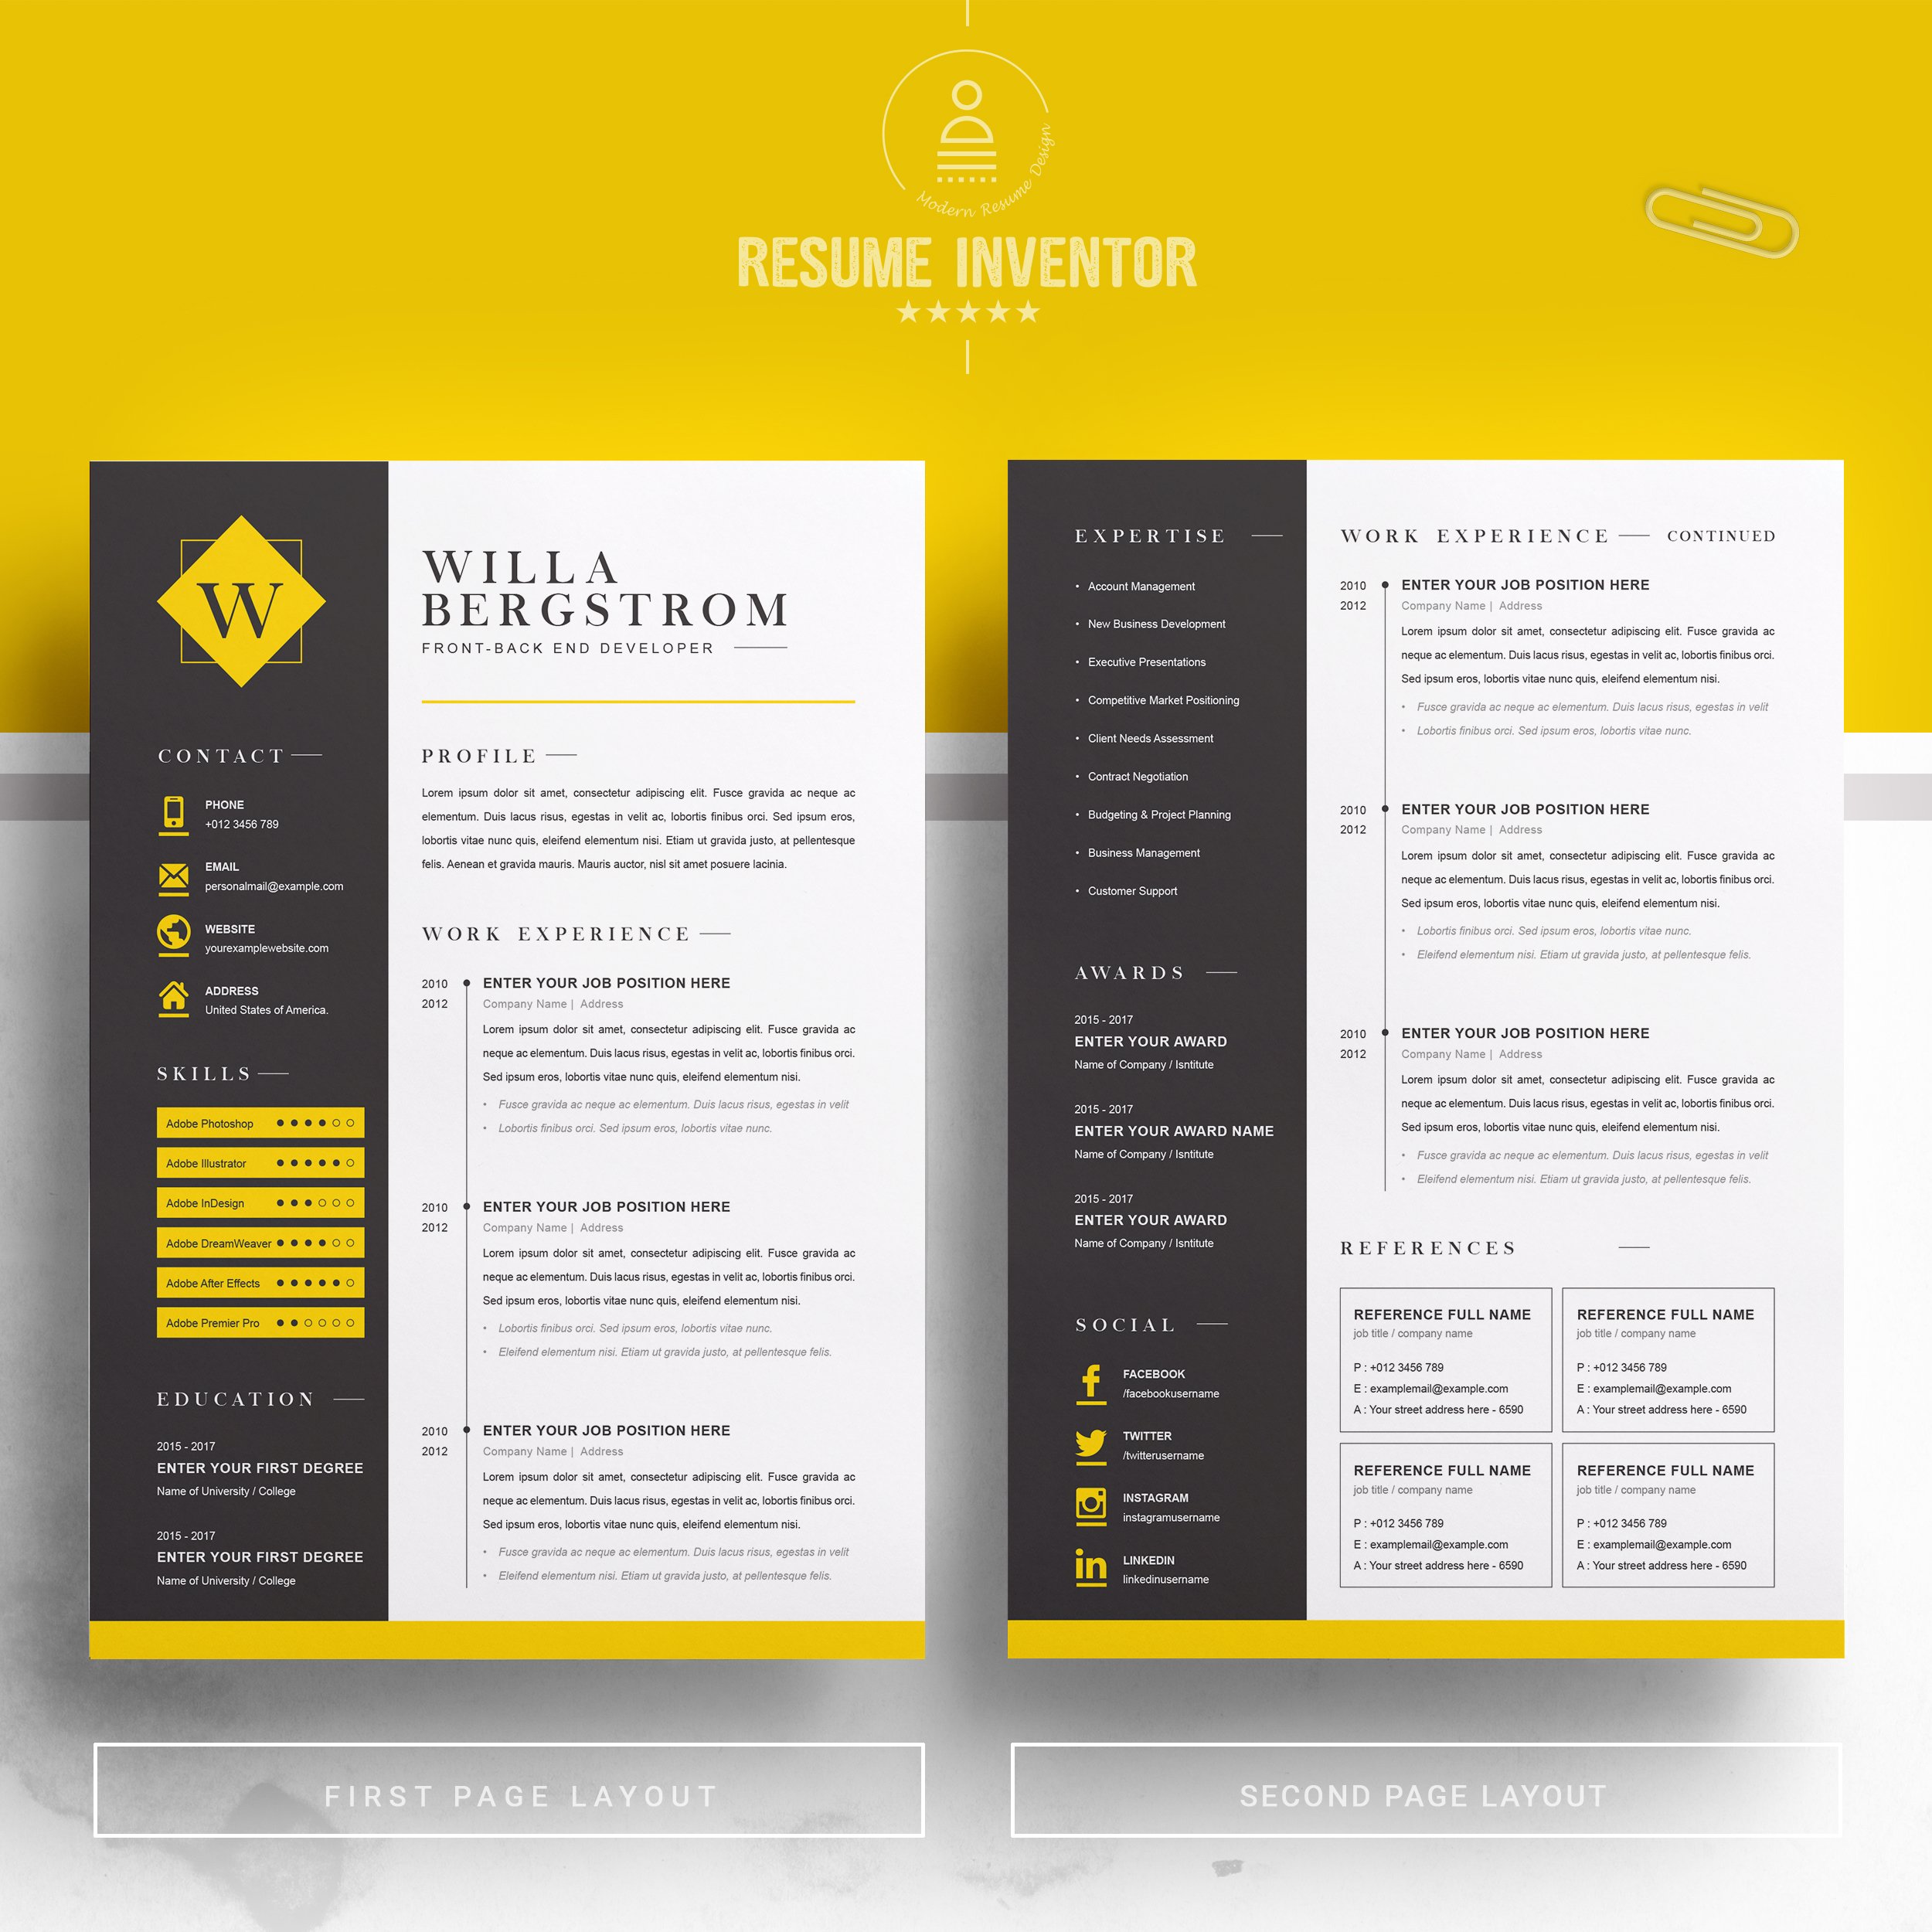 Minimal Yellow Resume Template / CV preview image.